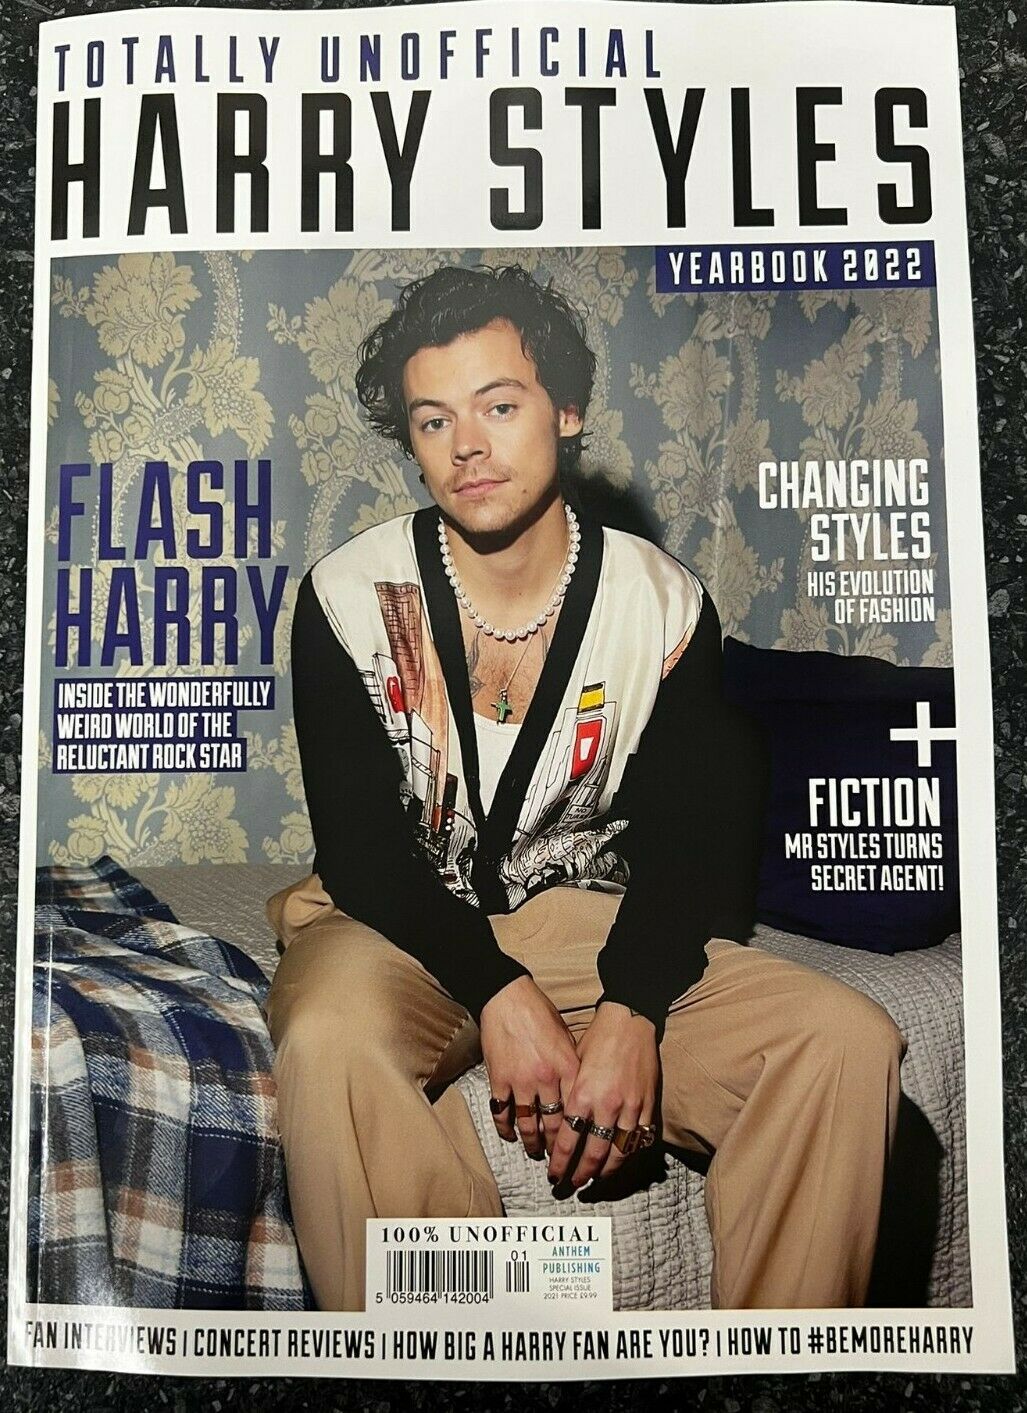 Harry Styles Yearbook 2022 - 116 Page Magazine Devoted To Harry! -  Yourcelebritymagazines